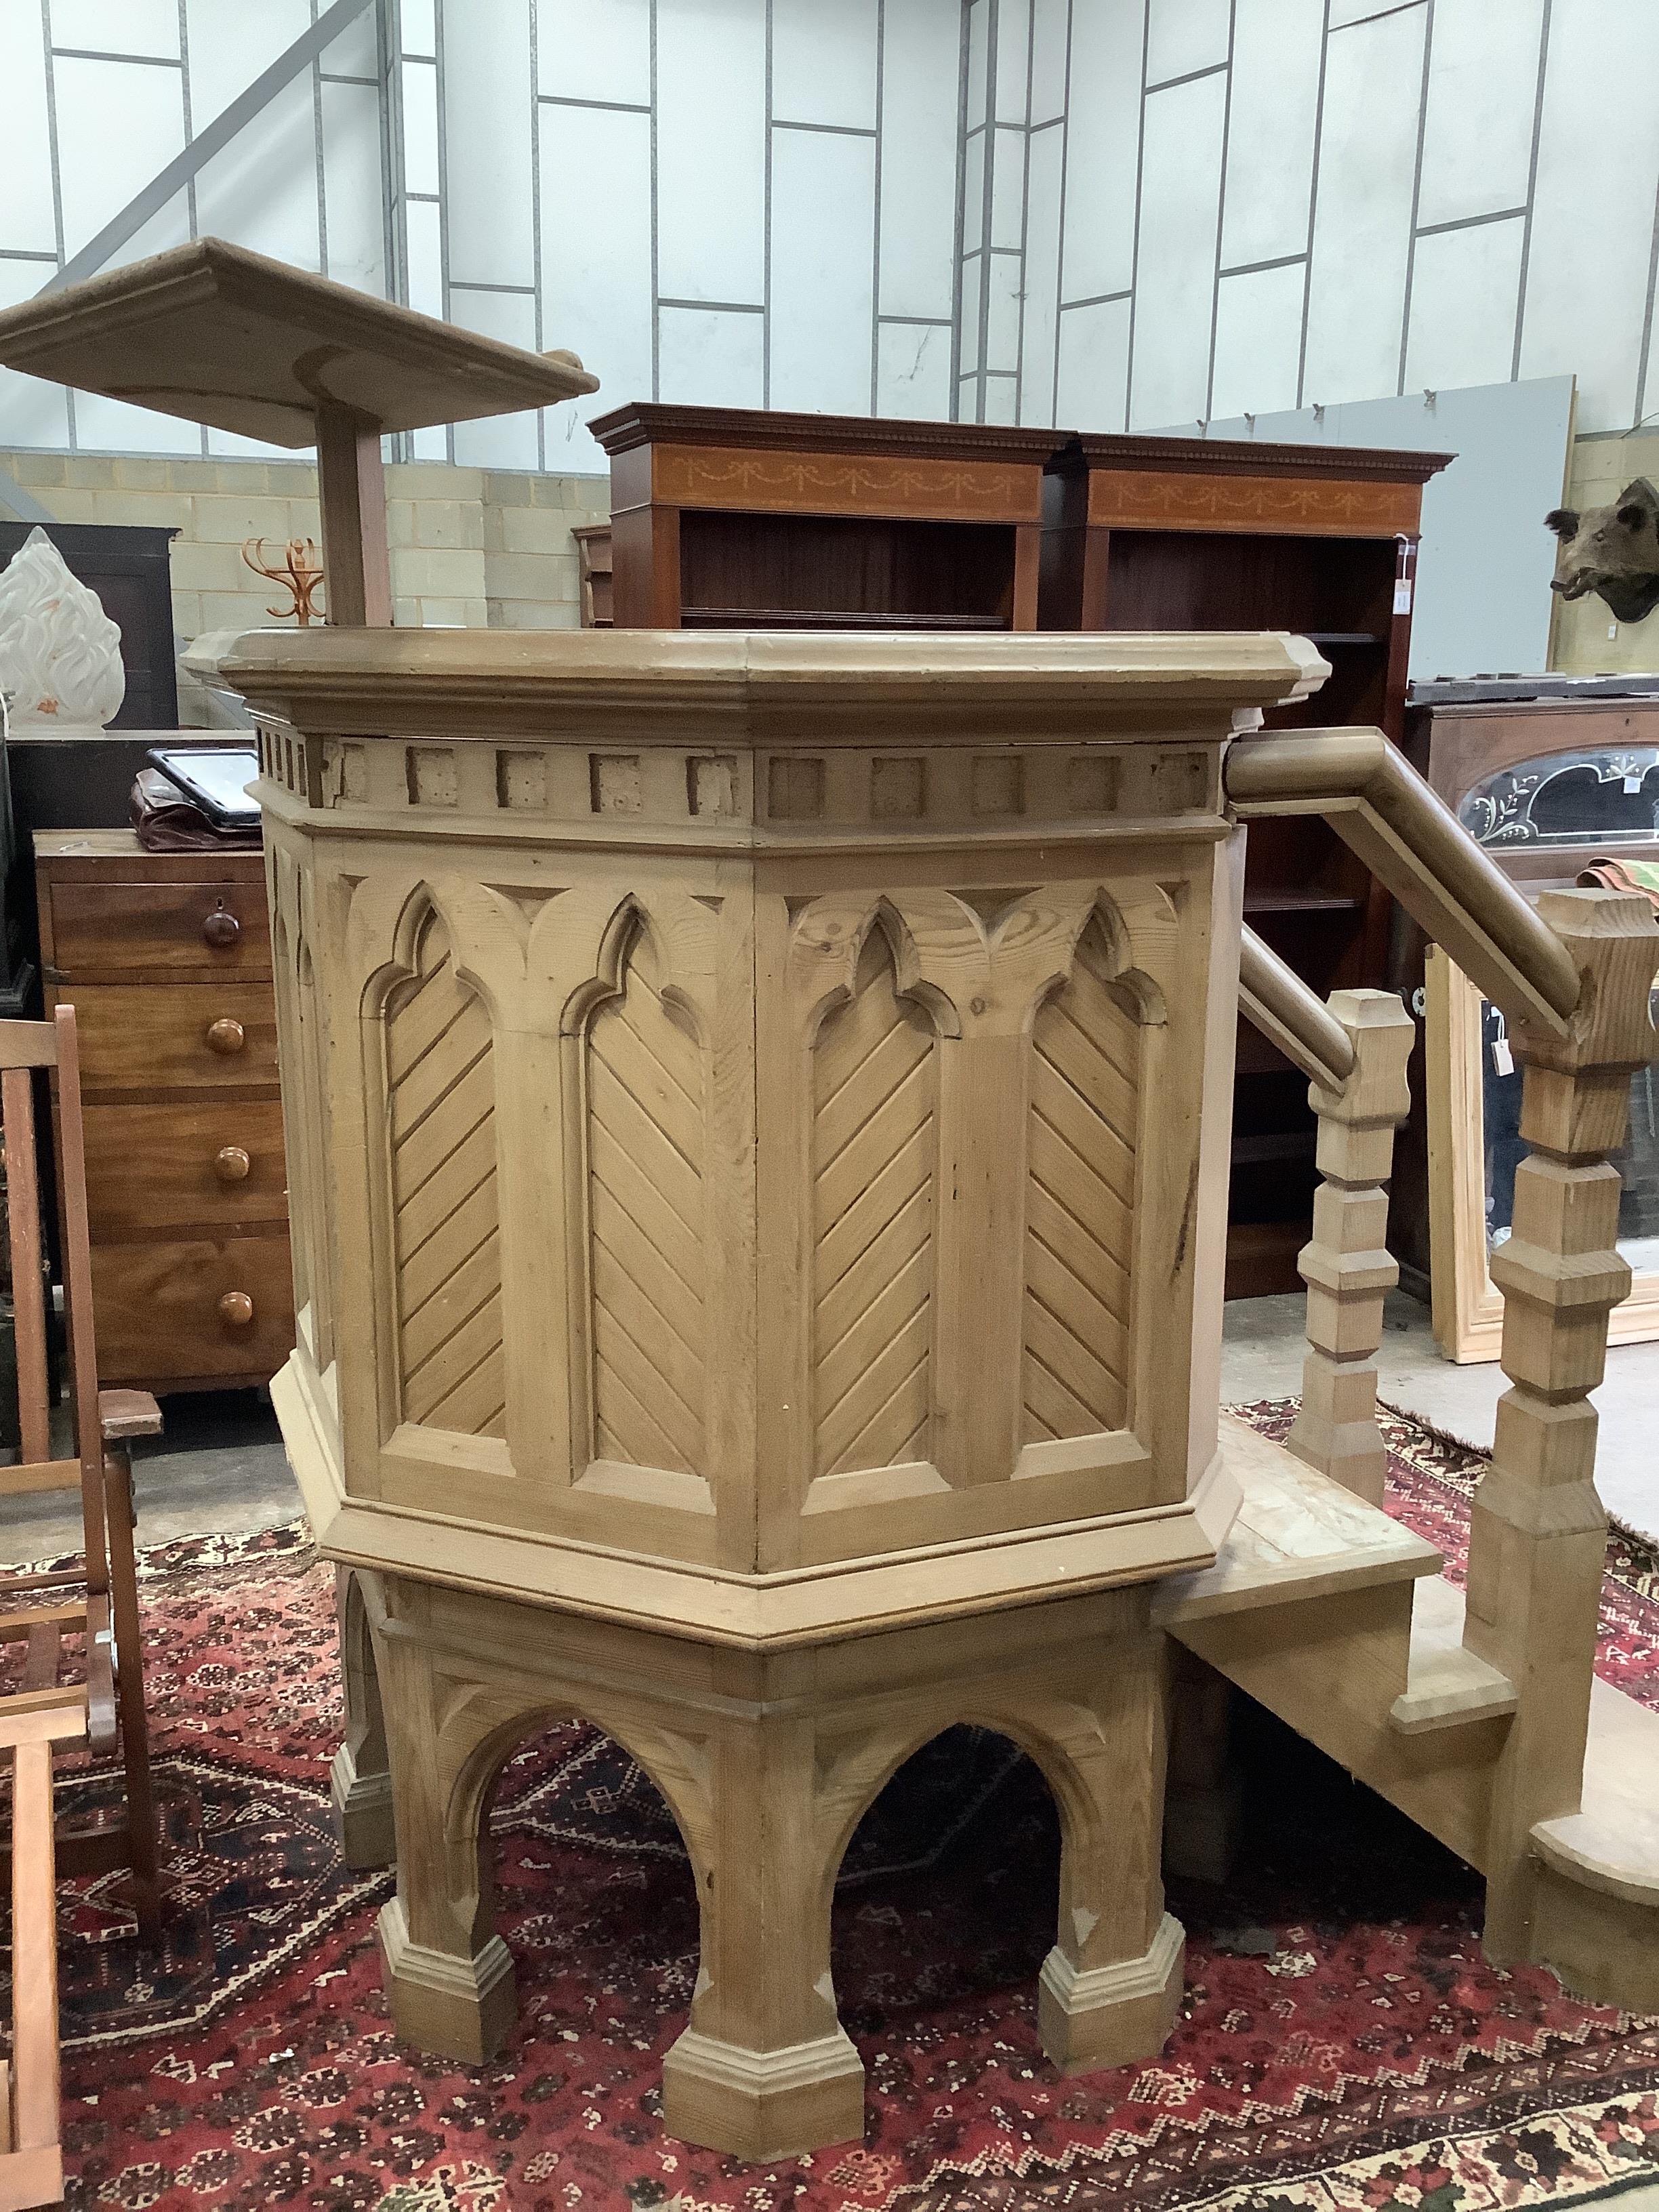 A Pugin style pitch pine pulpit with lecturn, height 165cm